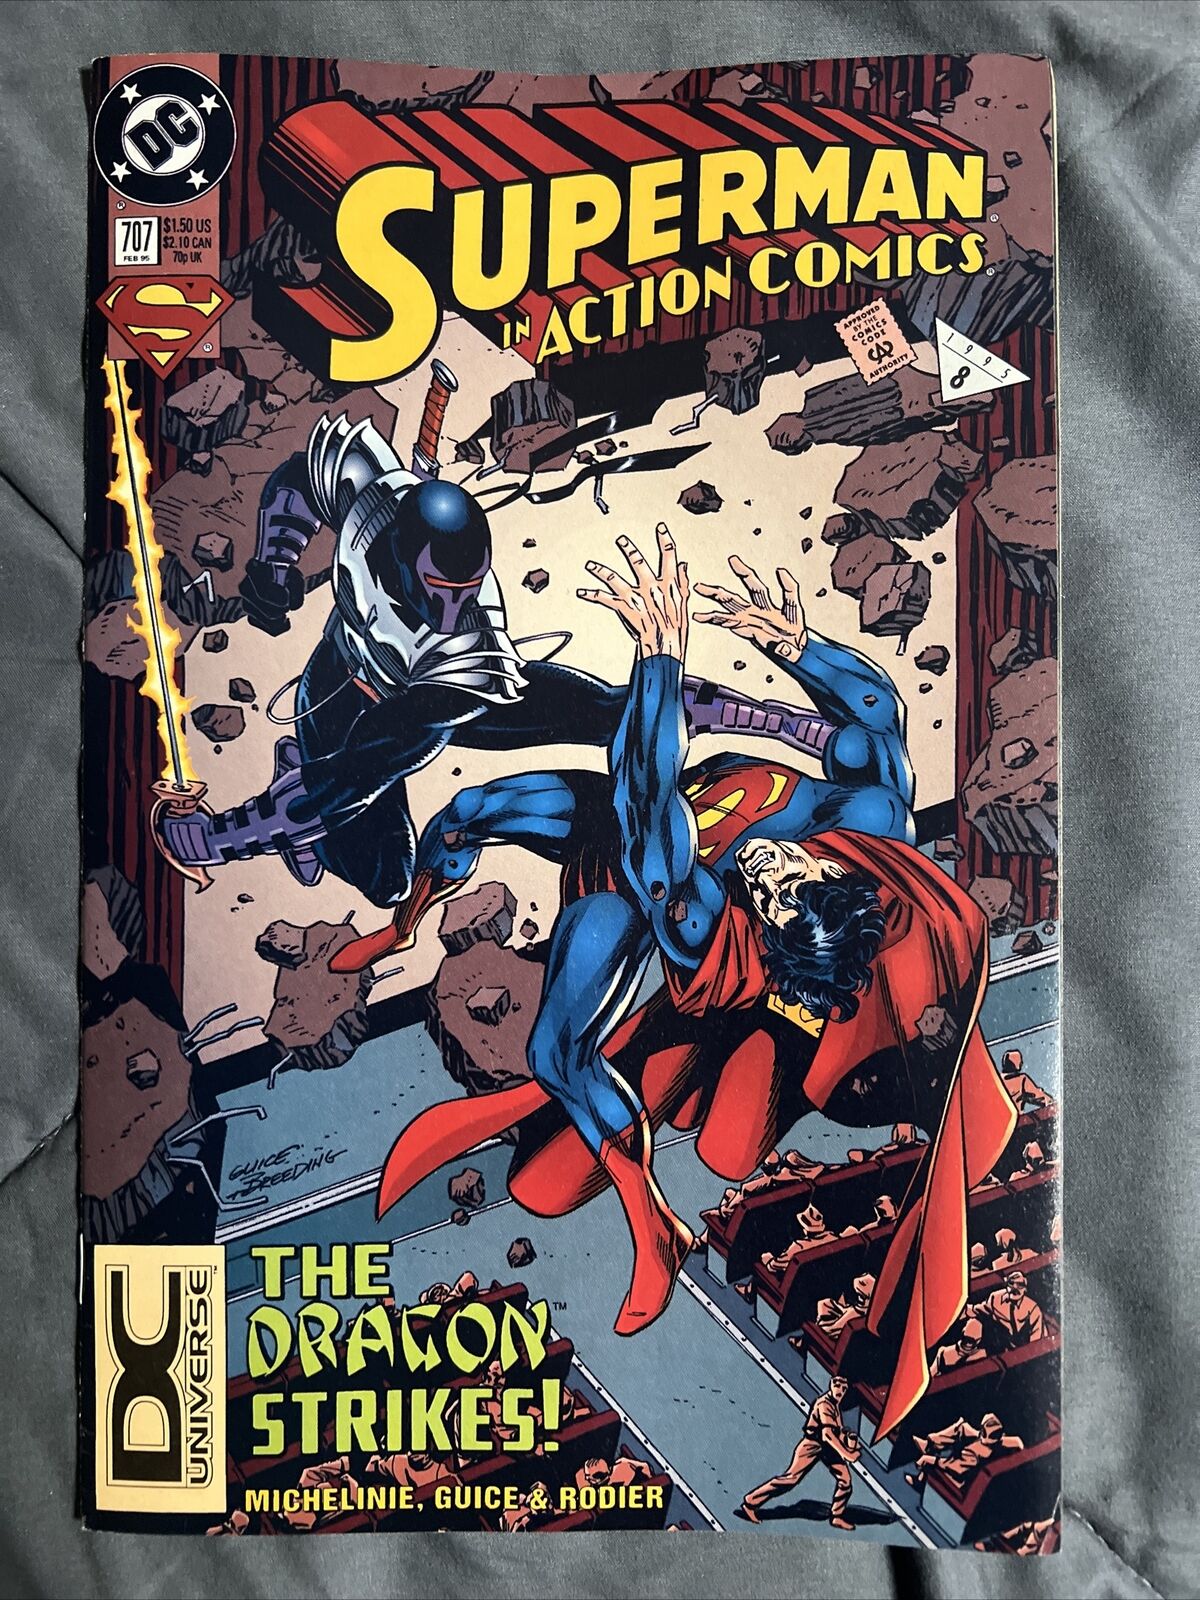 SUPERMAN in ACTION COMICS # 707 February 1995 DC UNIVERSE LOGO VARIANT